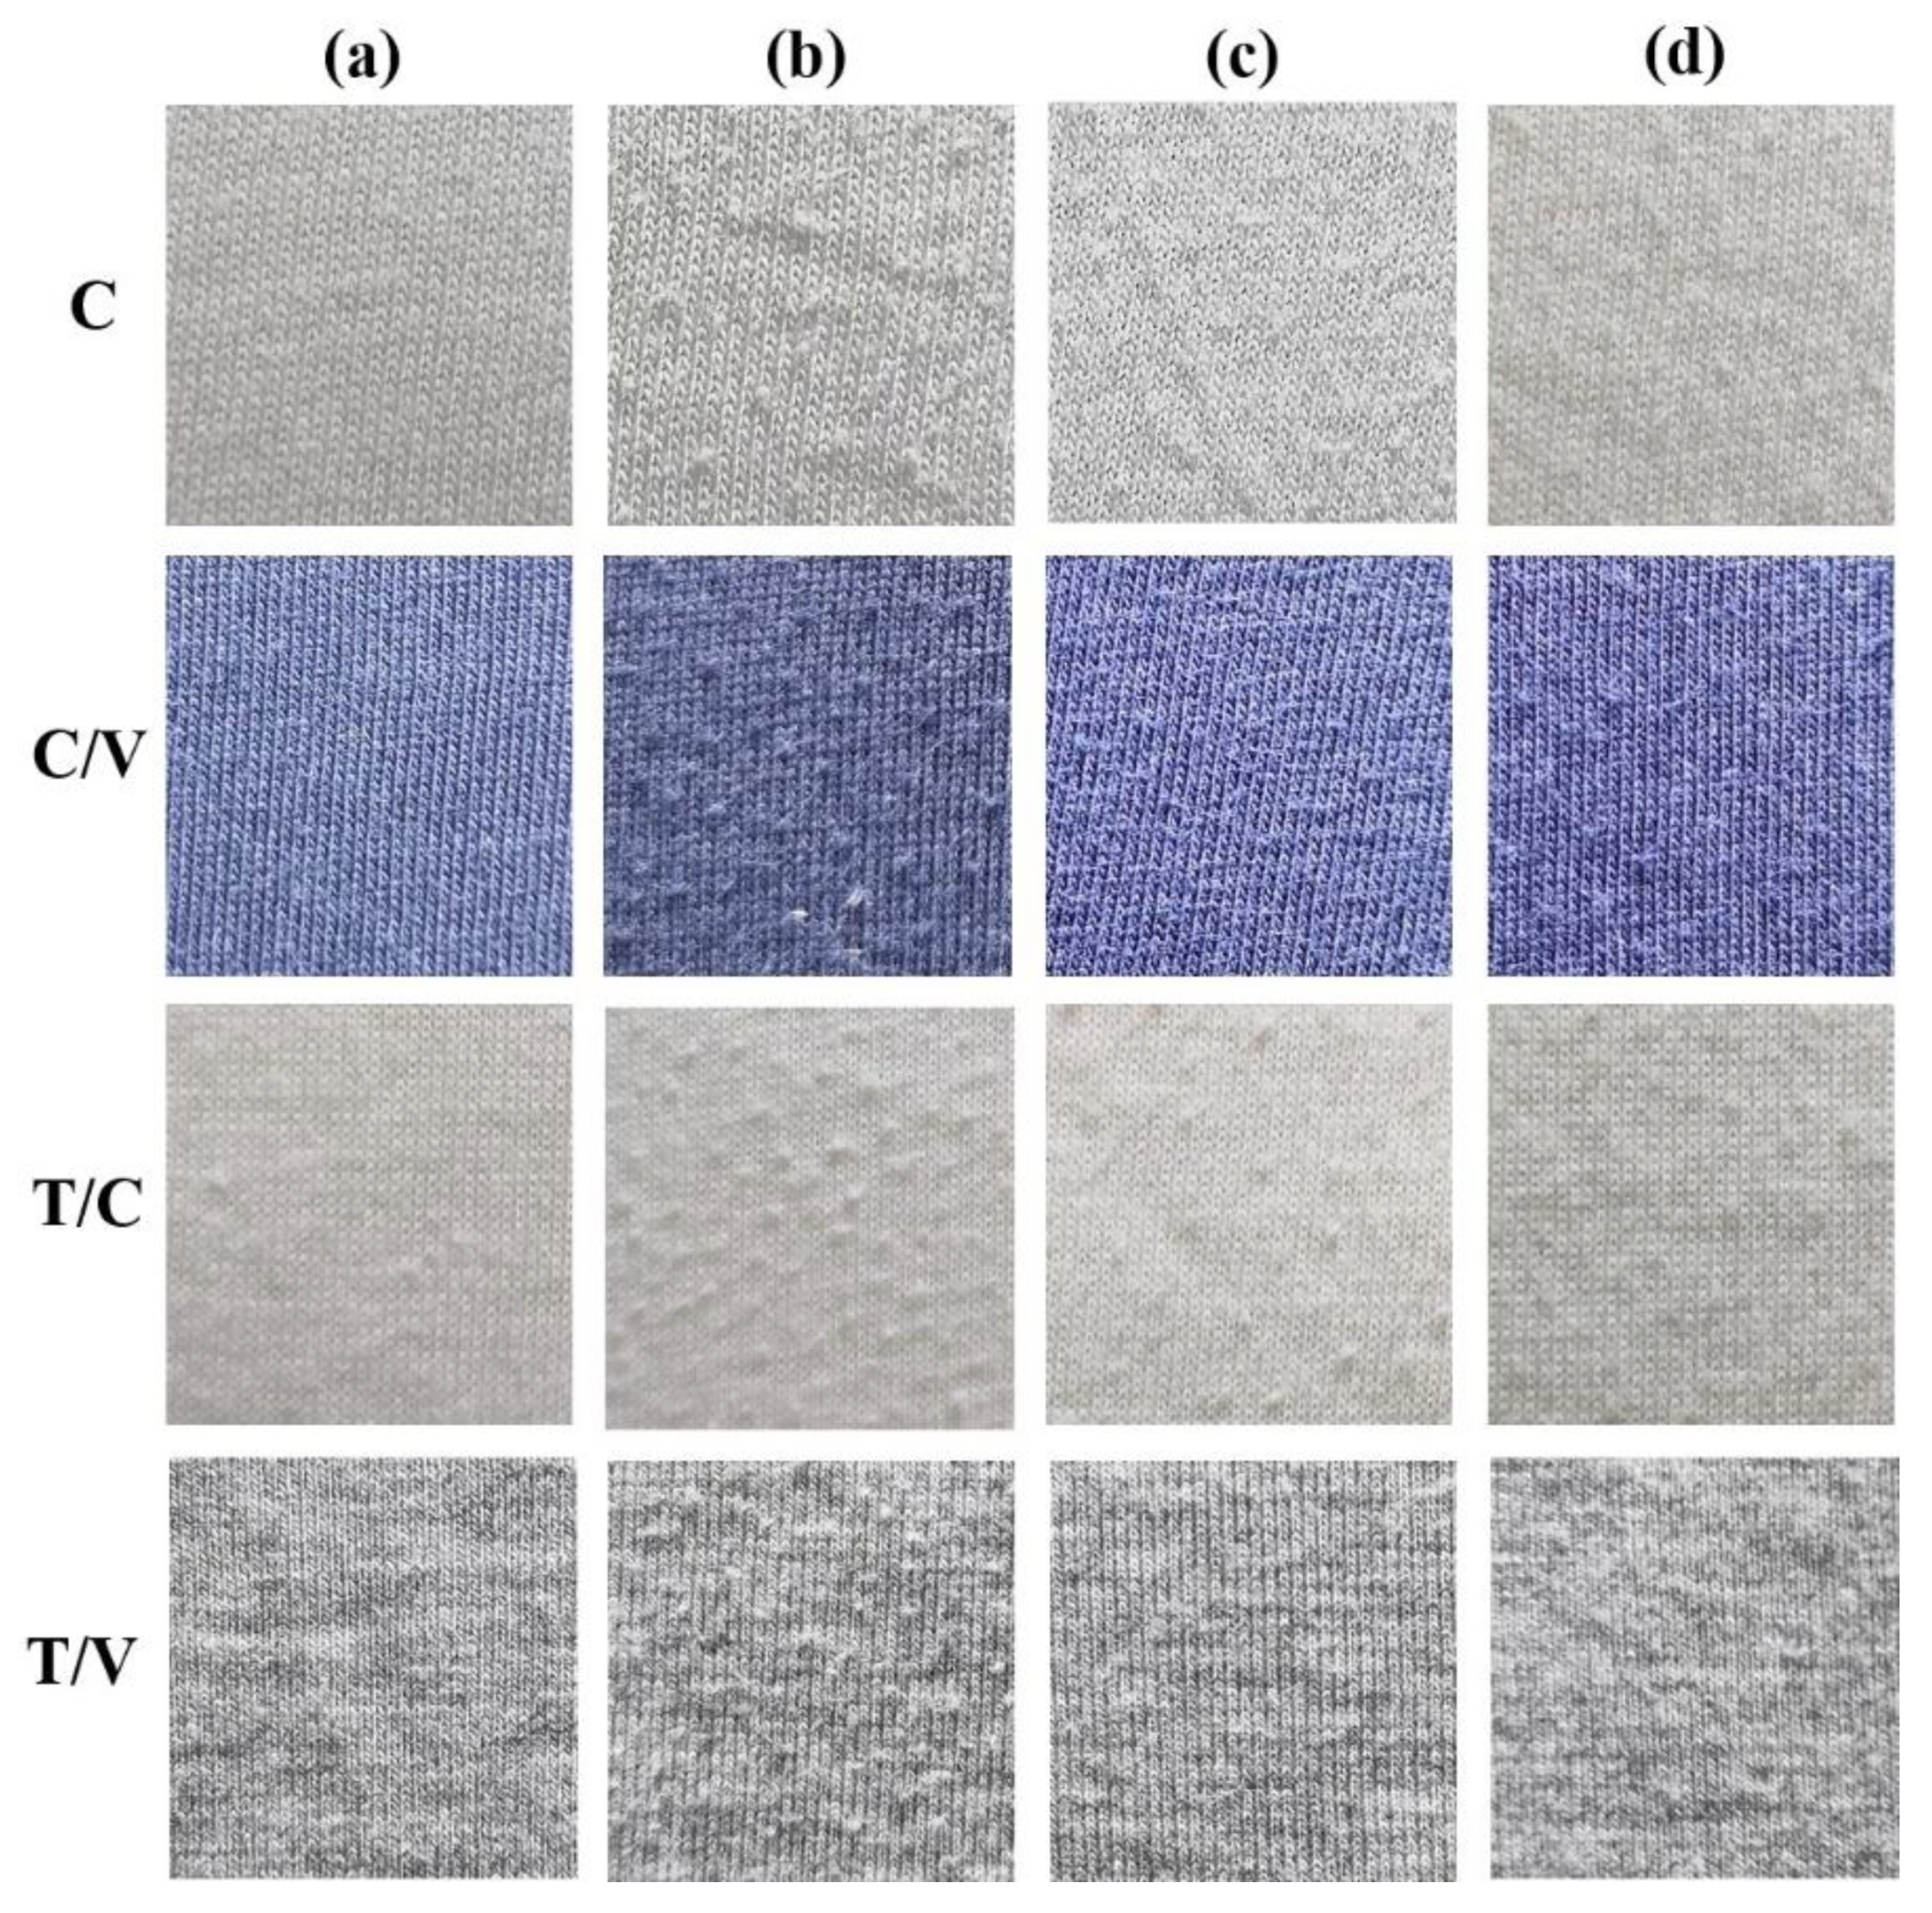 Coatings Free Full Text Improving The Anti Pilling Performance Of Cellulose Fiber Blended Knitted Fabrics With 2 4 6 Trichloropyrimidine Treatment